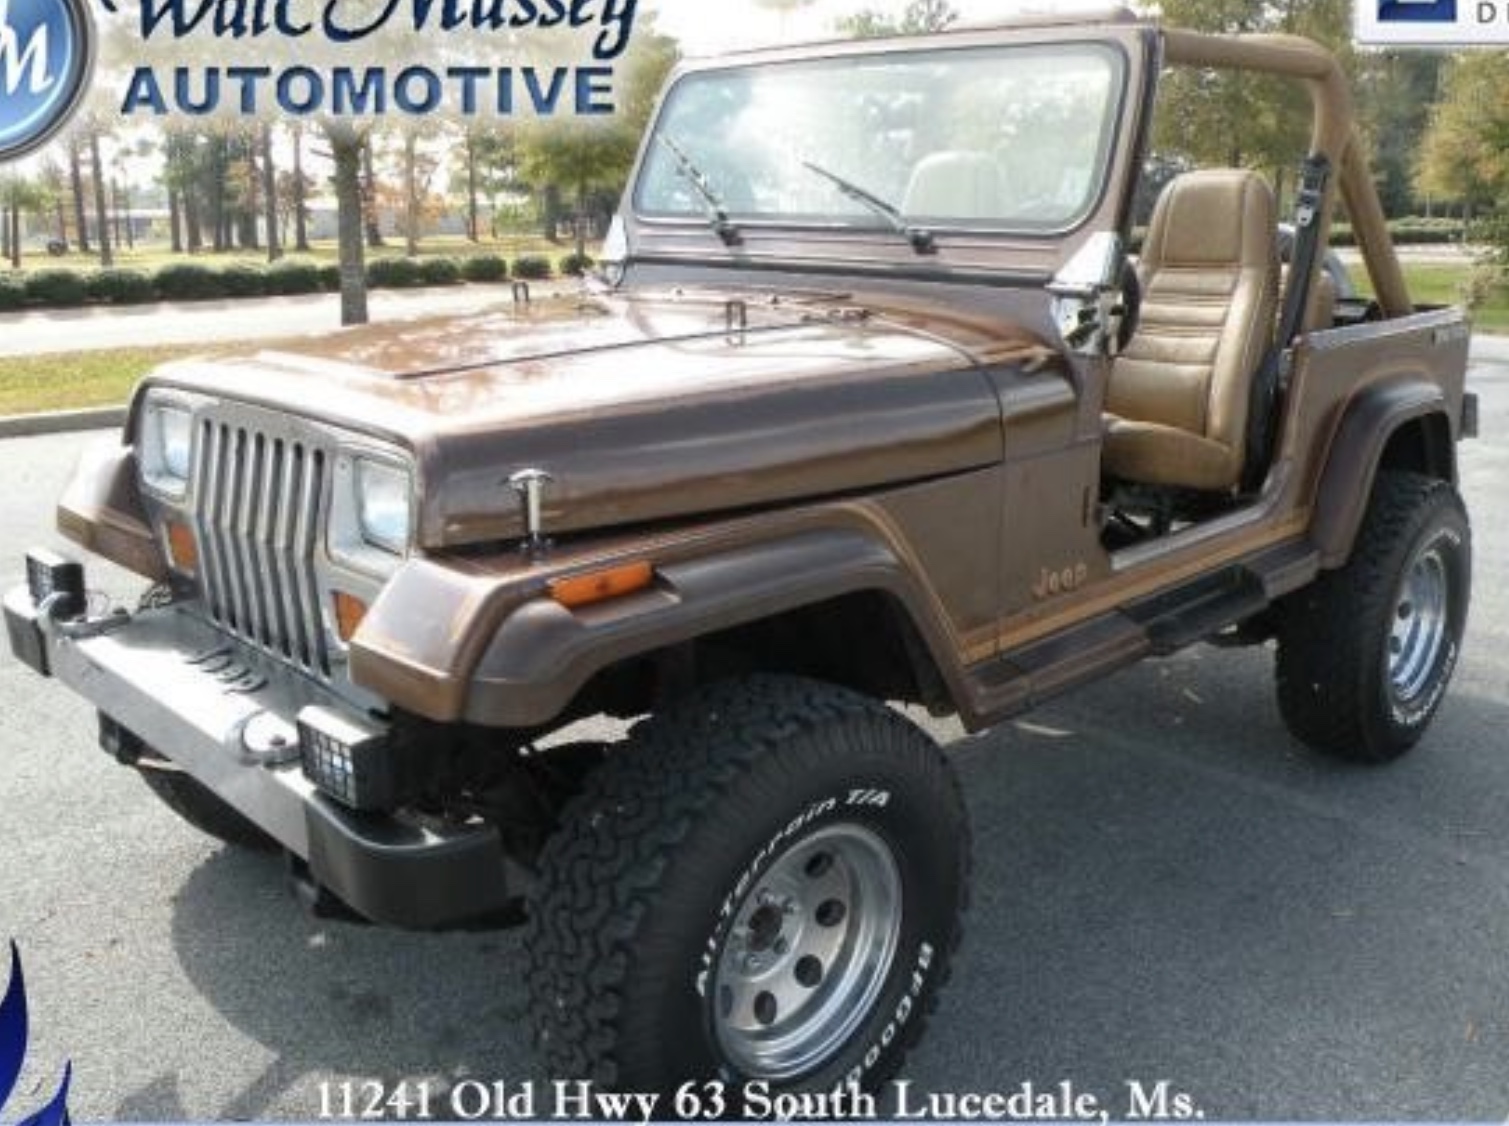 Jeep Gladiator We need to talk about the “Jeep Wave” 25075E67-7EAF-4168-9B99-6806DB423090